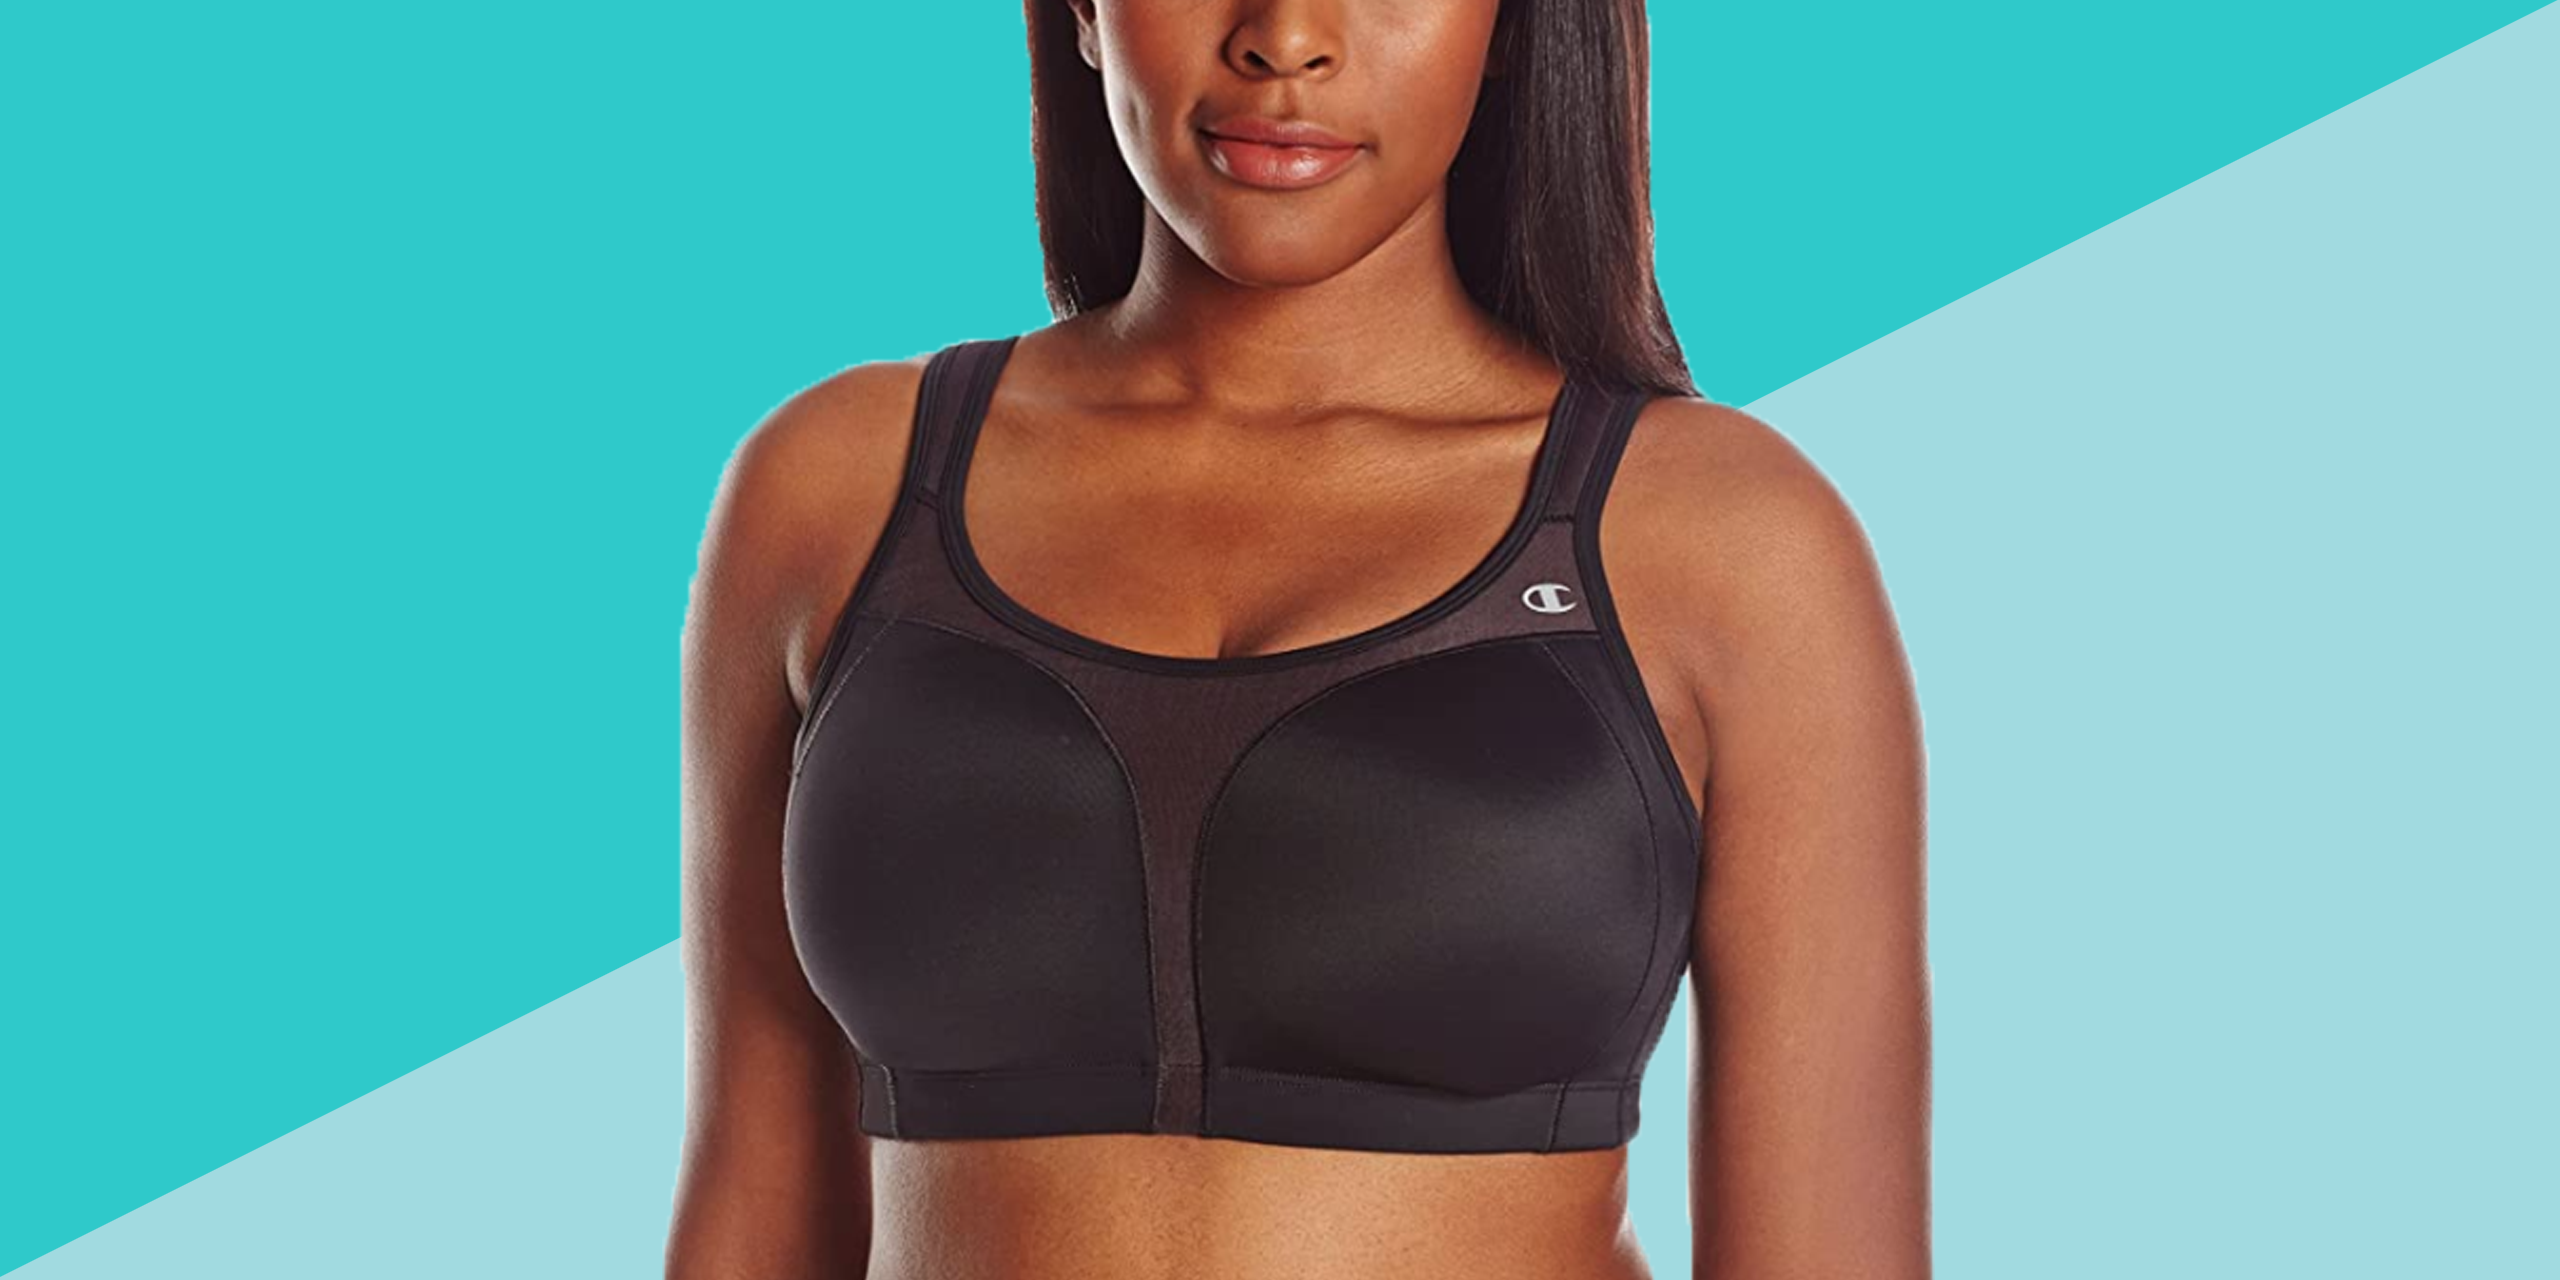 Moving Comfort Sports Bras Are The Best Bras Ever